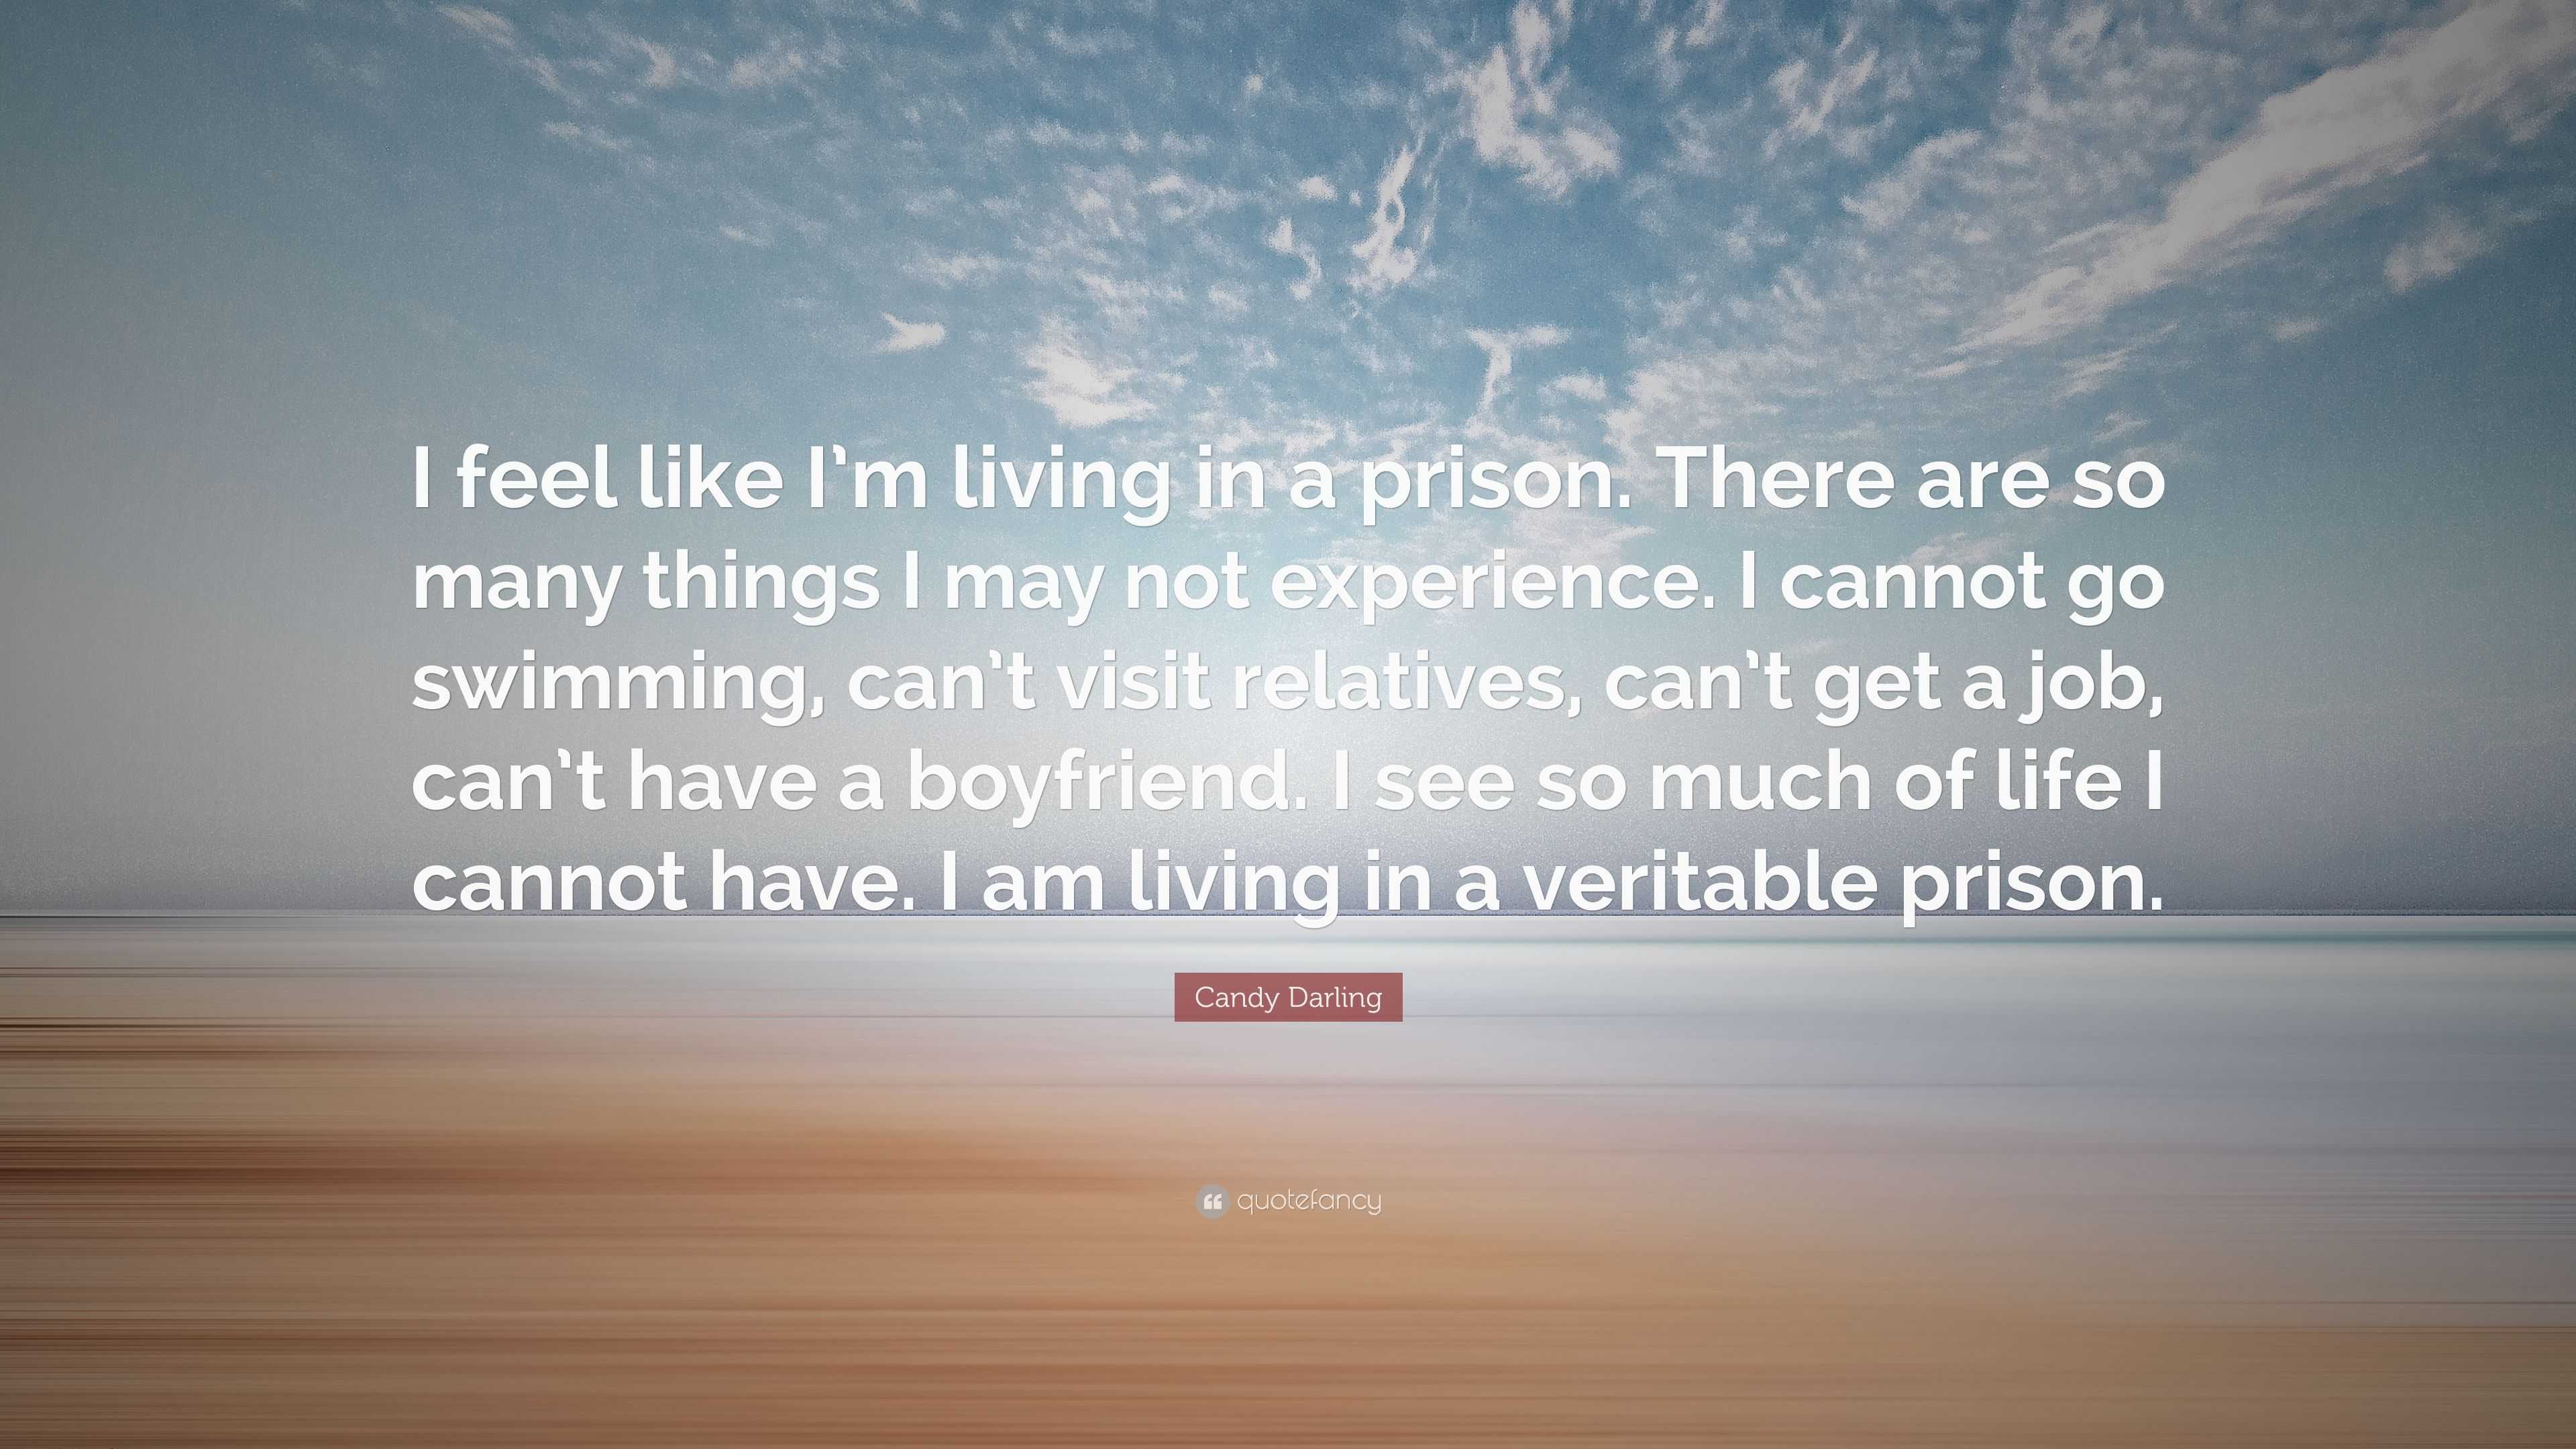 Candy Darling Quote: “I Feel Like I'm Living In A Prison. There Are So Many Things I May Not Experience. I Cannot Go Swimming, Can't Visit Rel...”